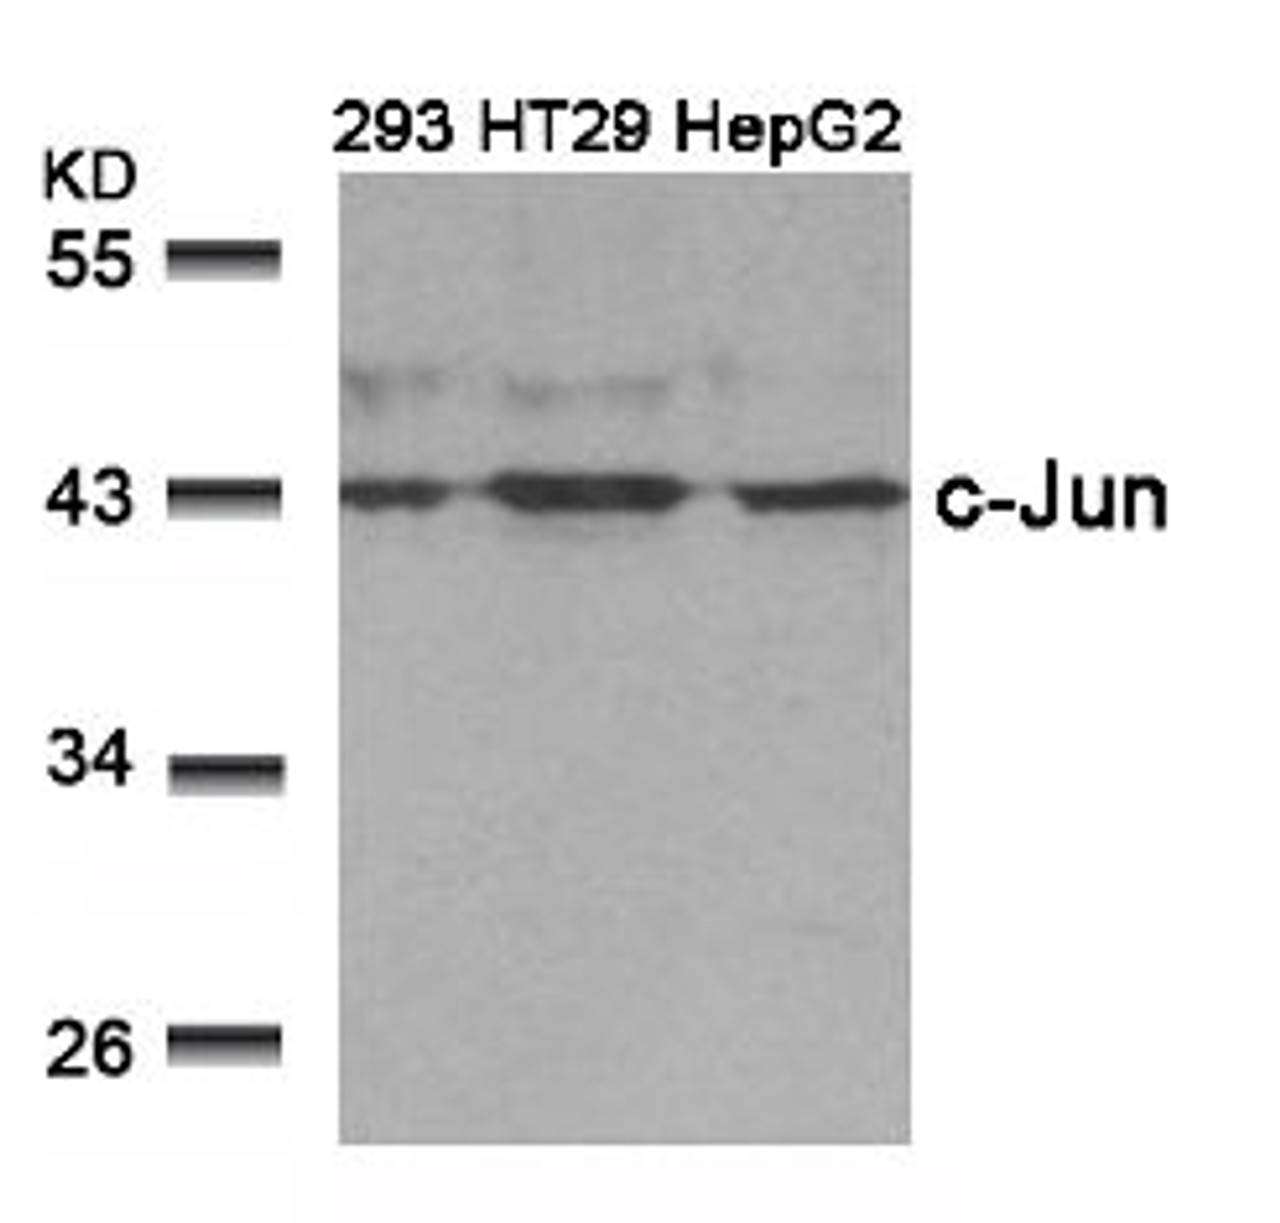 Western blot analysis of lysed extracts from 293, HT29 and HepG2 cells using c-Jun (Ab-239) .